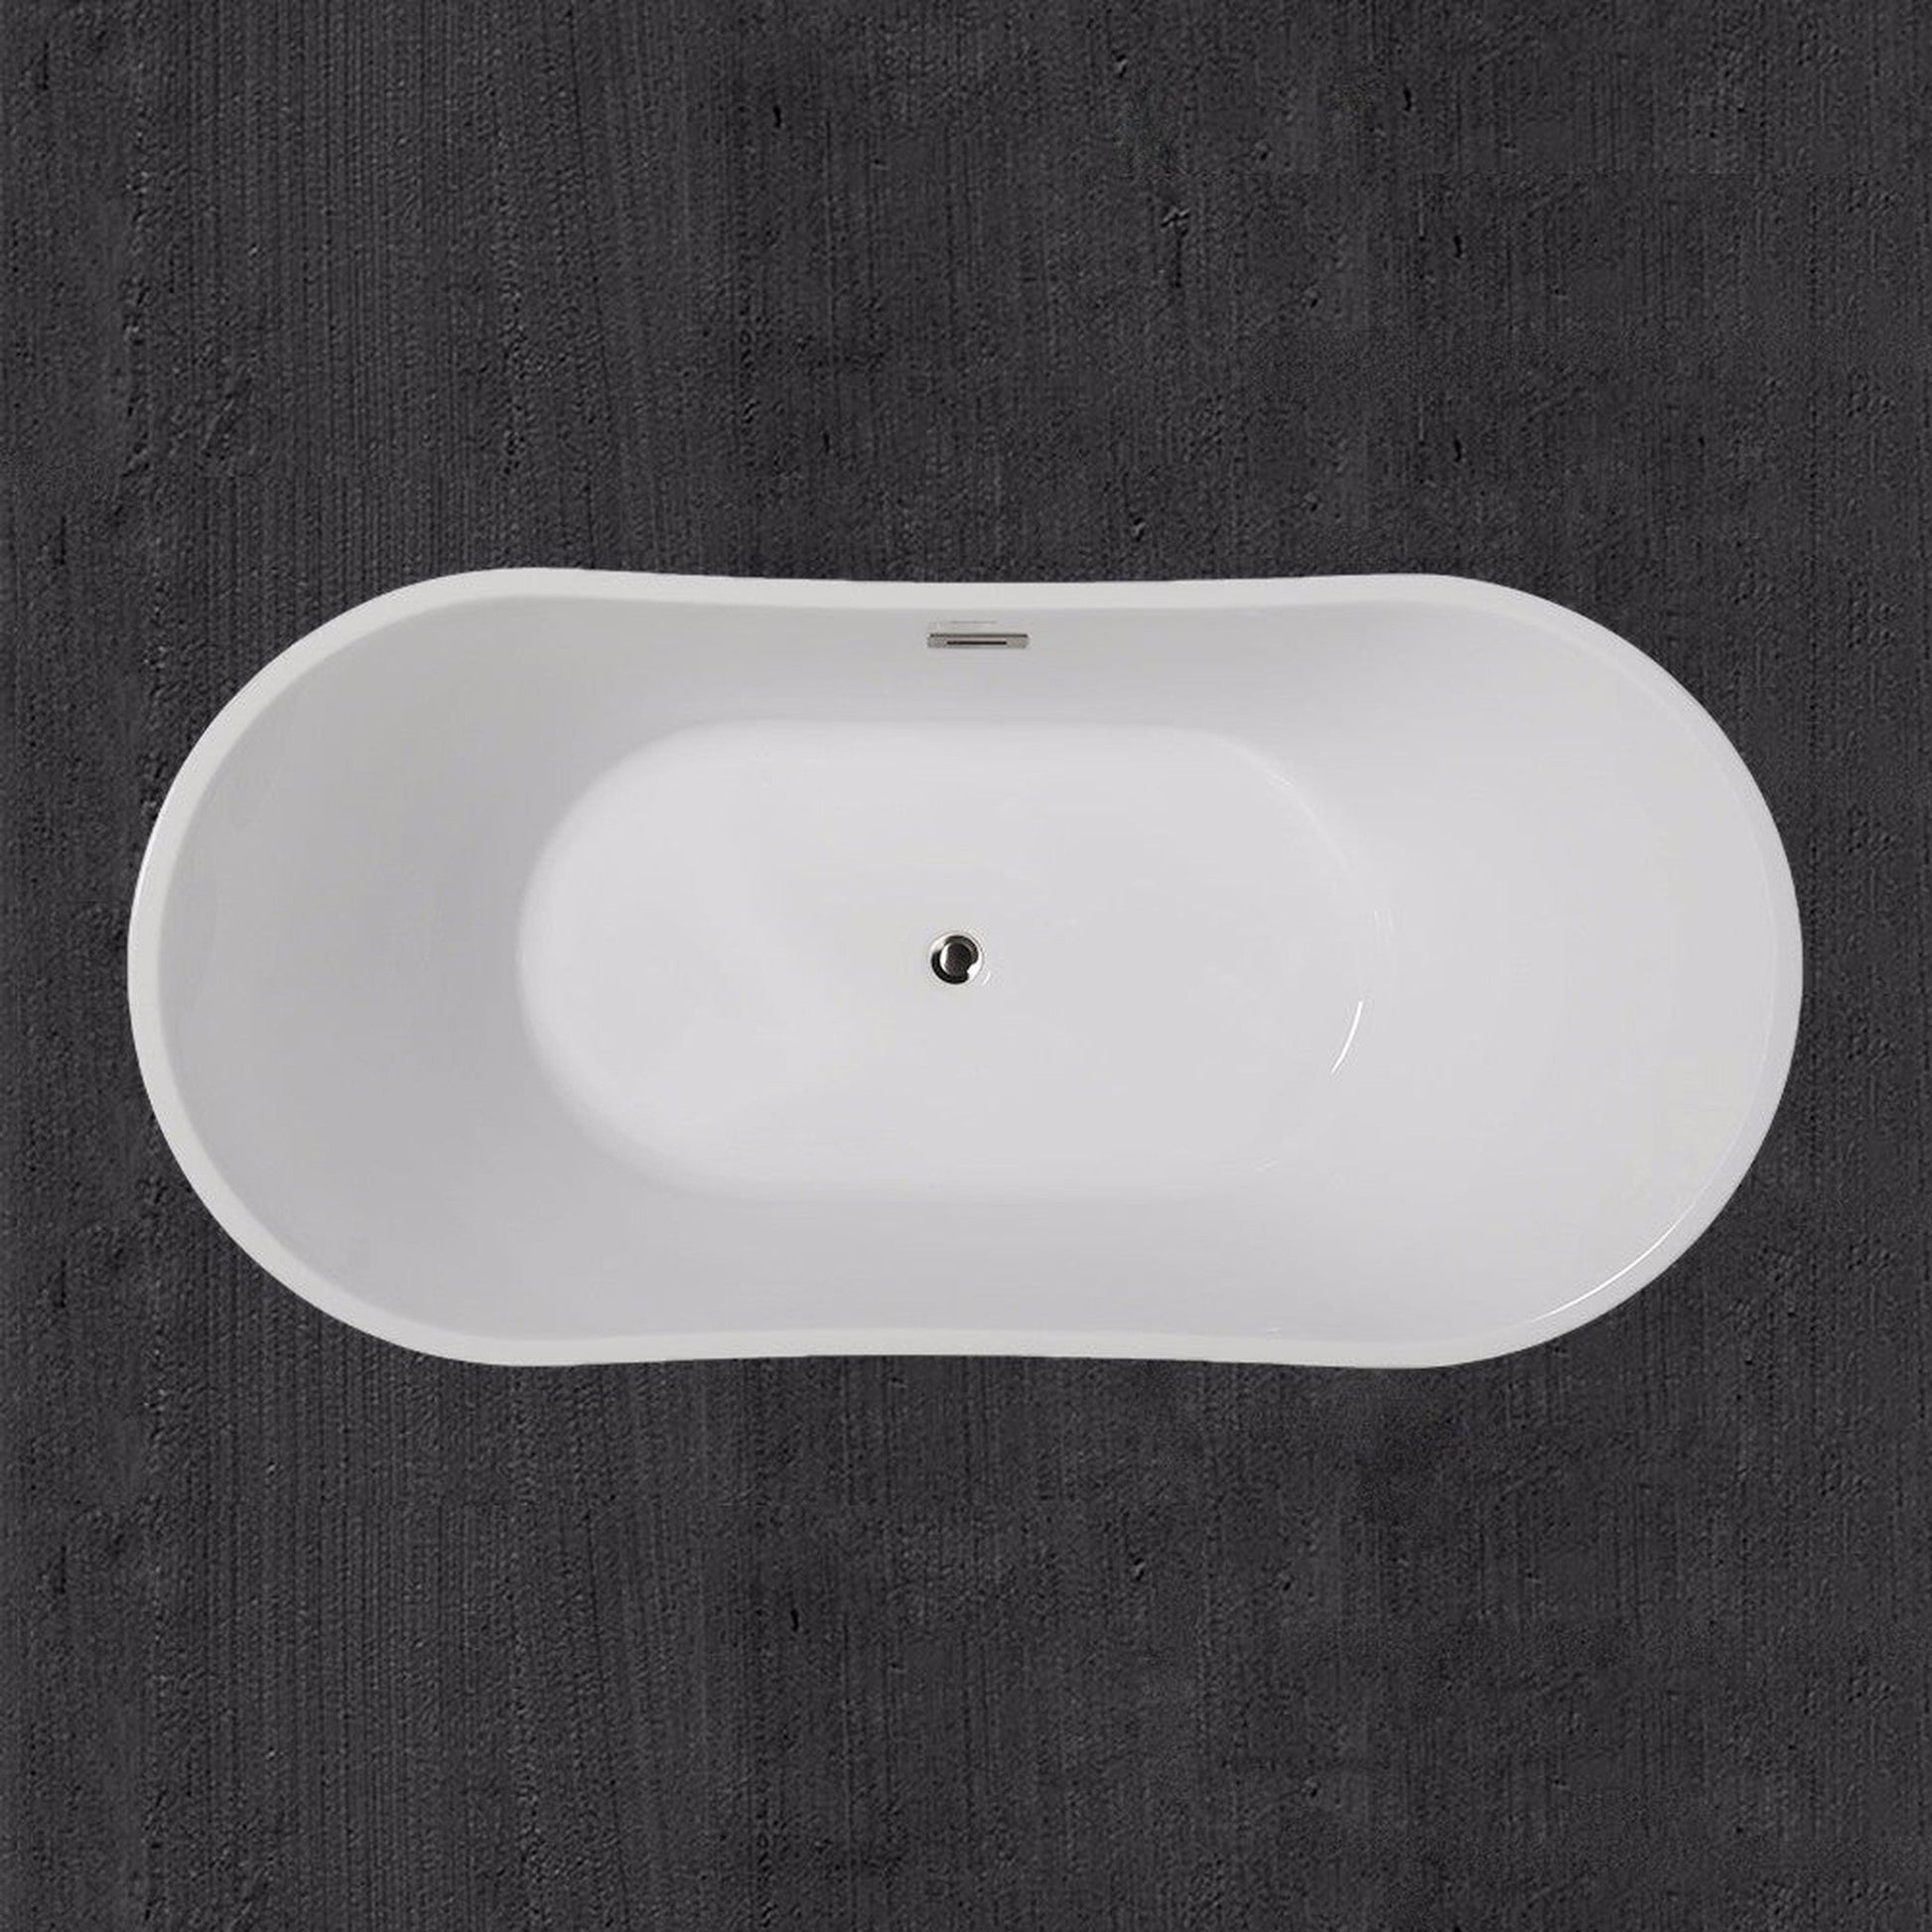 WoodBridge B0010 67" White Acrylic Freestanding Contemporary Soaking Bathtub With Brushed Nickel Drain, Overflow, F0070BNVT Tub Filler and Caddy Tray